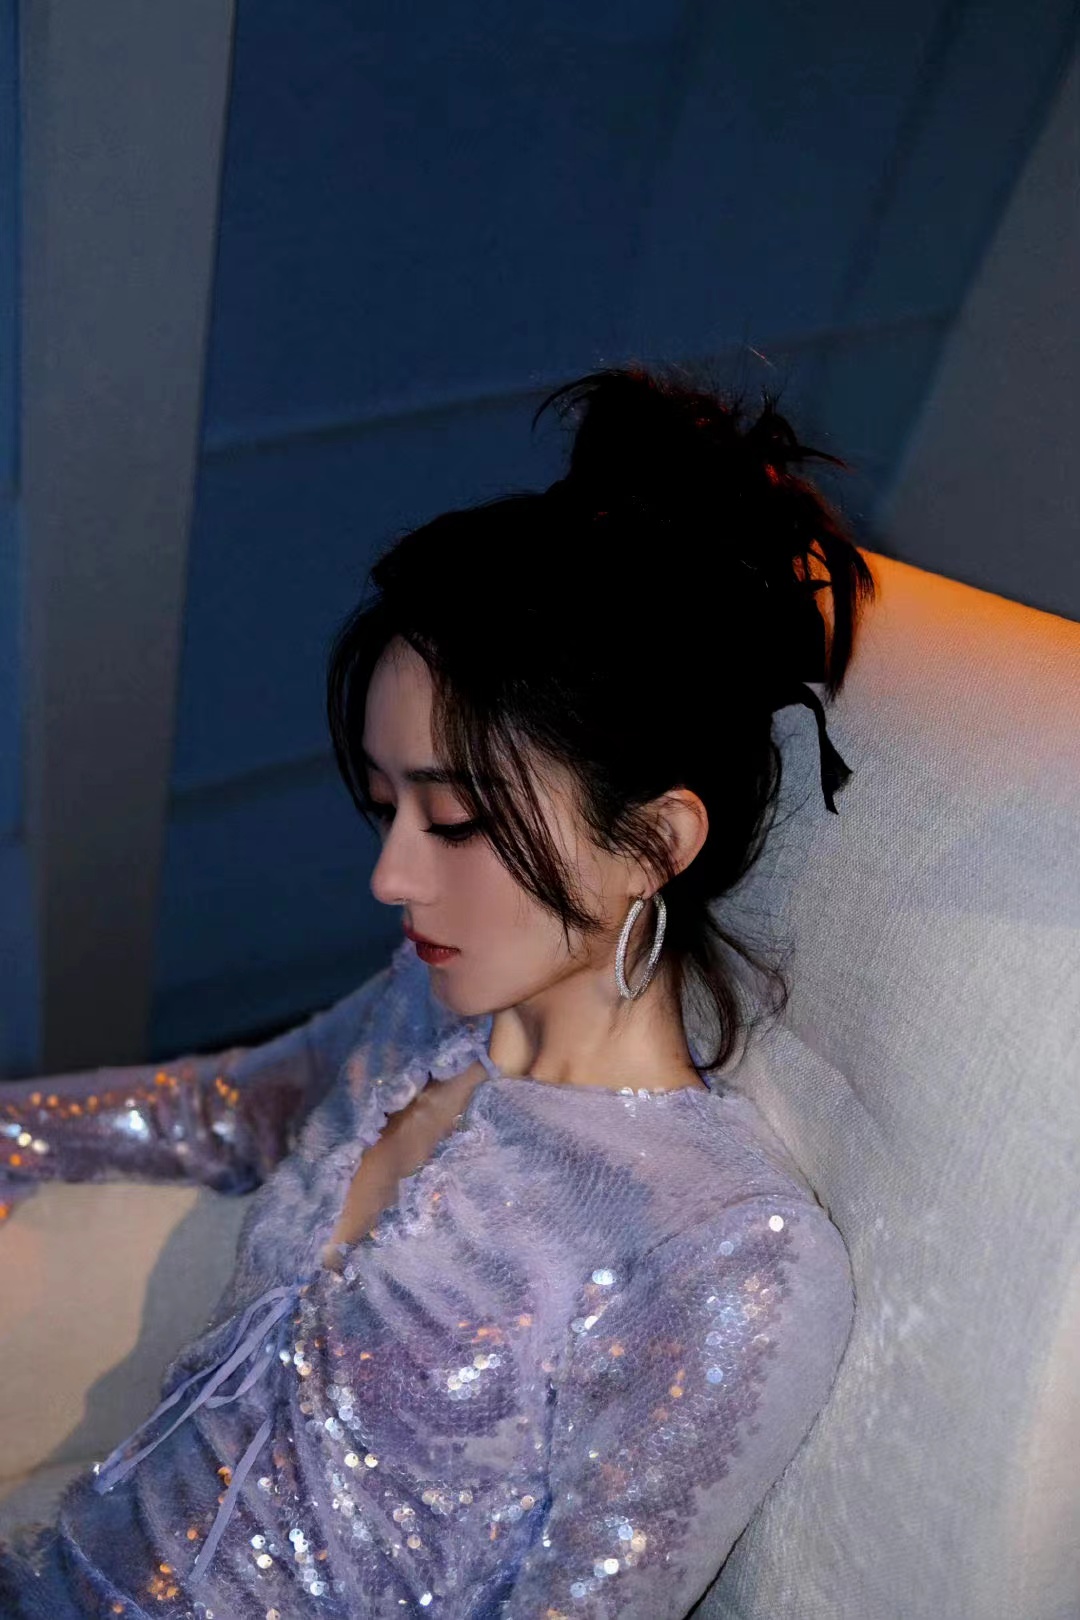 Zhao Liying's fashion sense is on! Wearing a sequined skirt, her ...